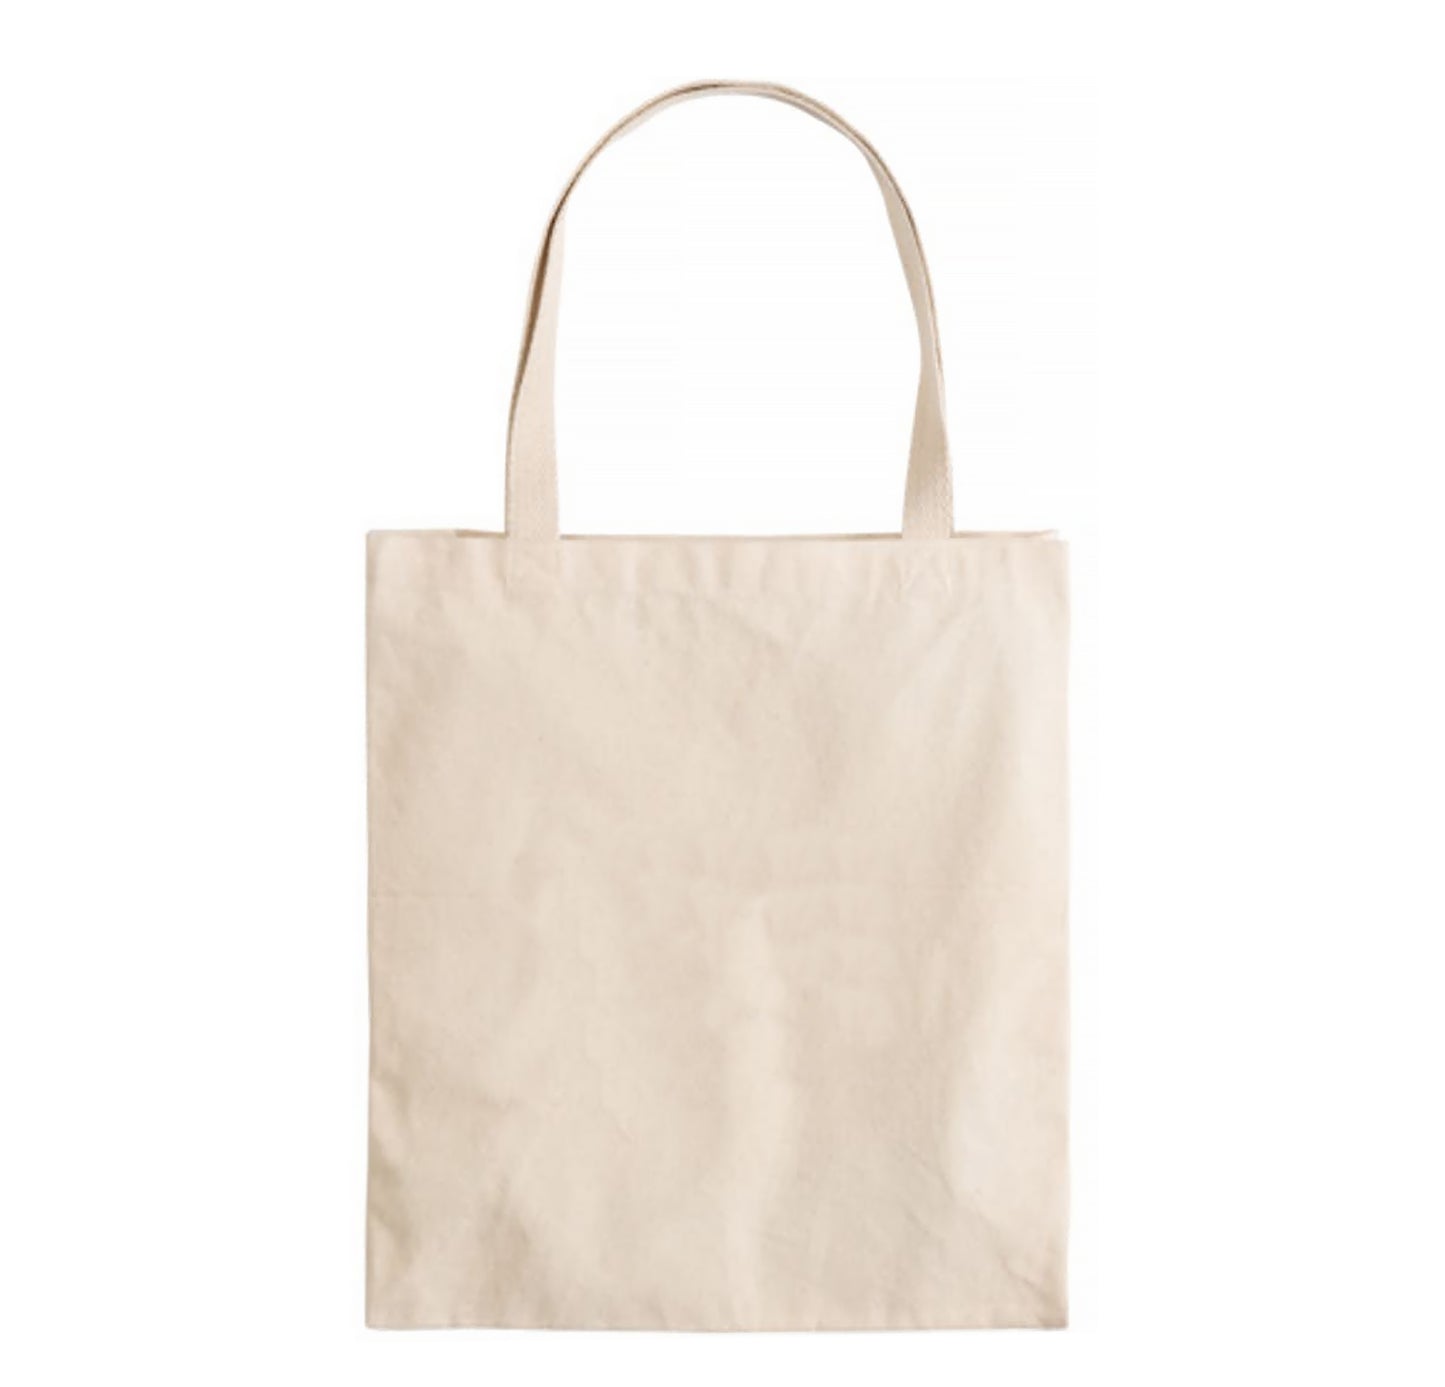 custom tote, custom totes bags, custom tote bags no minimum,custom tote bags canvas, printed tote, your design, promotional item, totes for trade shows, business totes, giveaways, freebies, custom tote bags printing